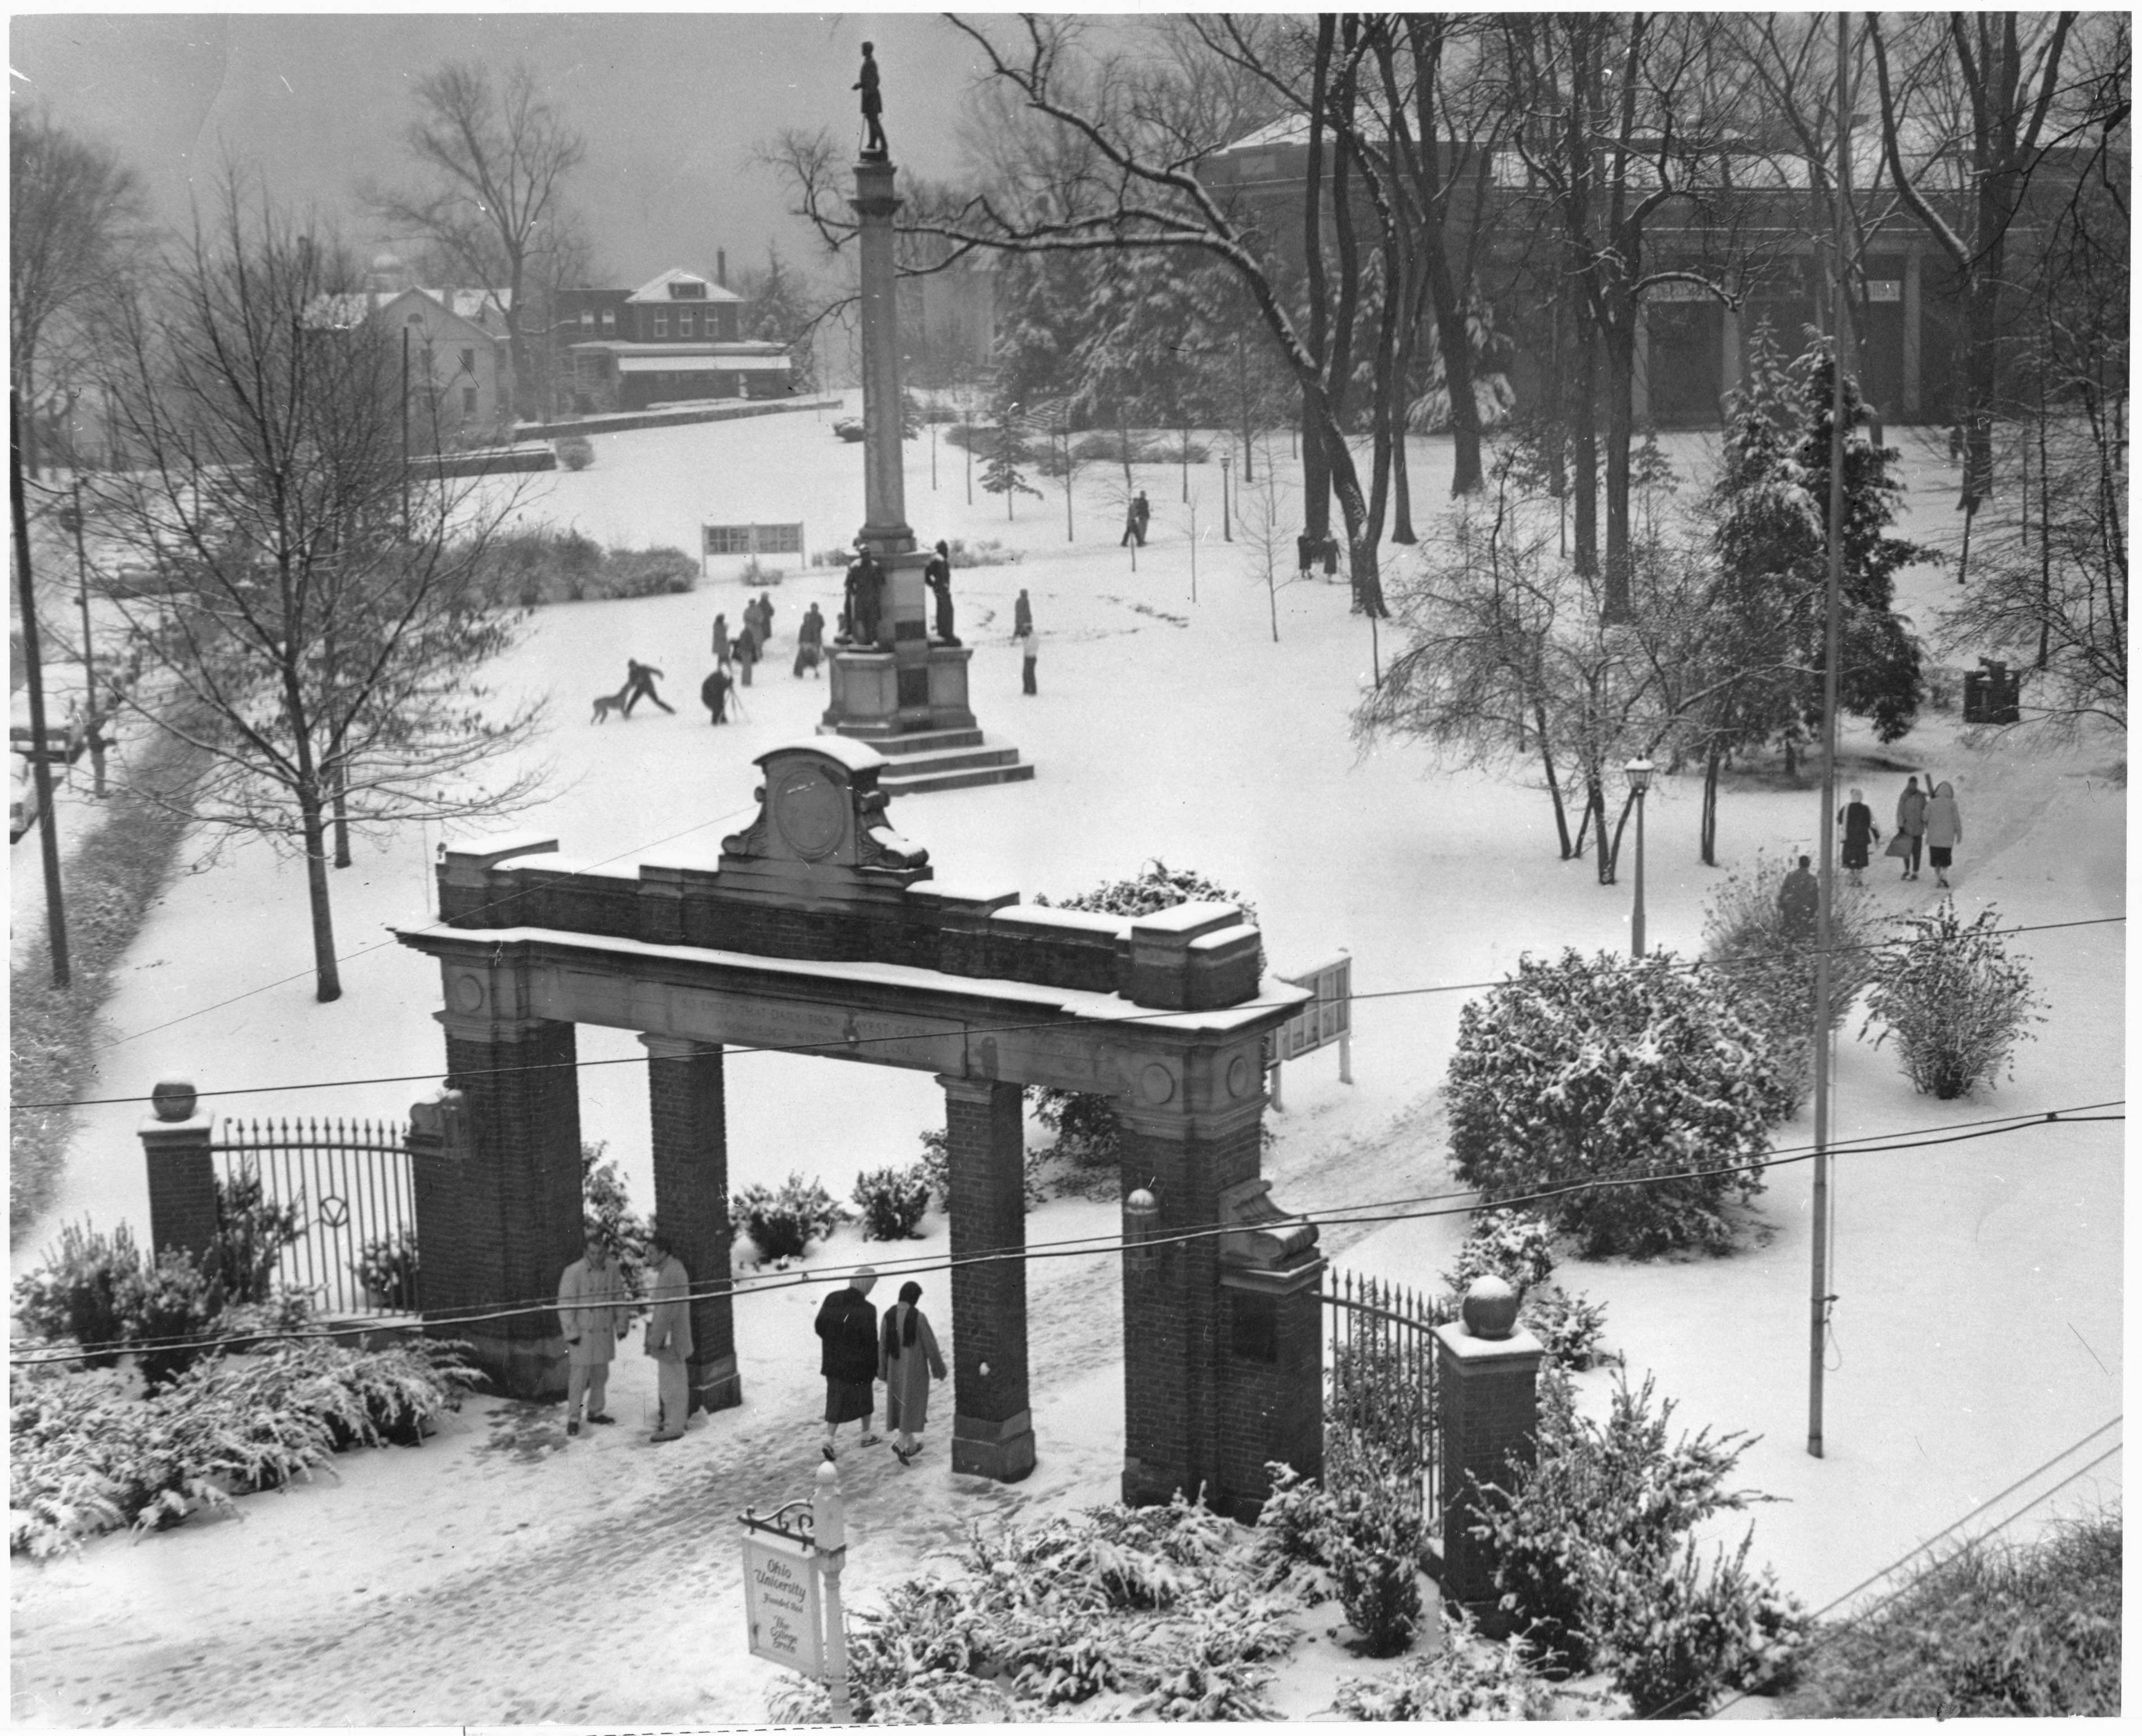 Students gather and frolic in the snow near the Soldiers and Sailors monument in this photo from the 1940s. Photo courtesy the Mahn Center for Archives & Special Collections